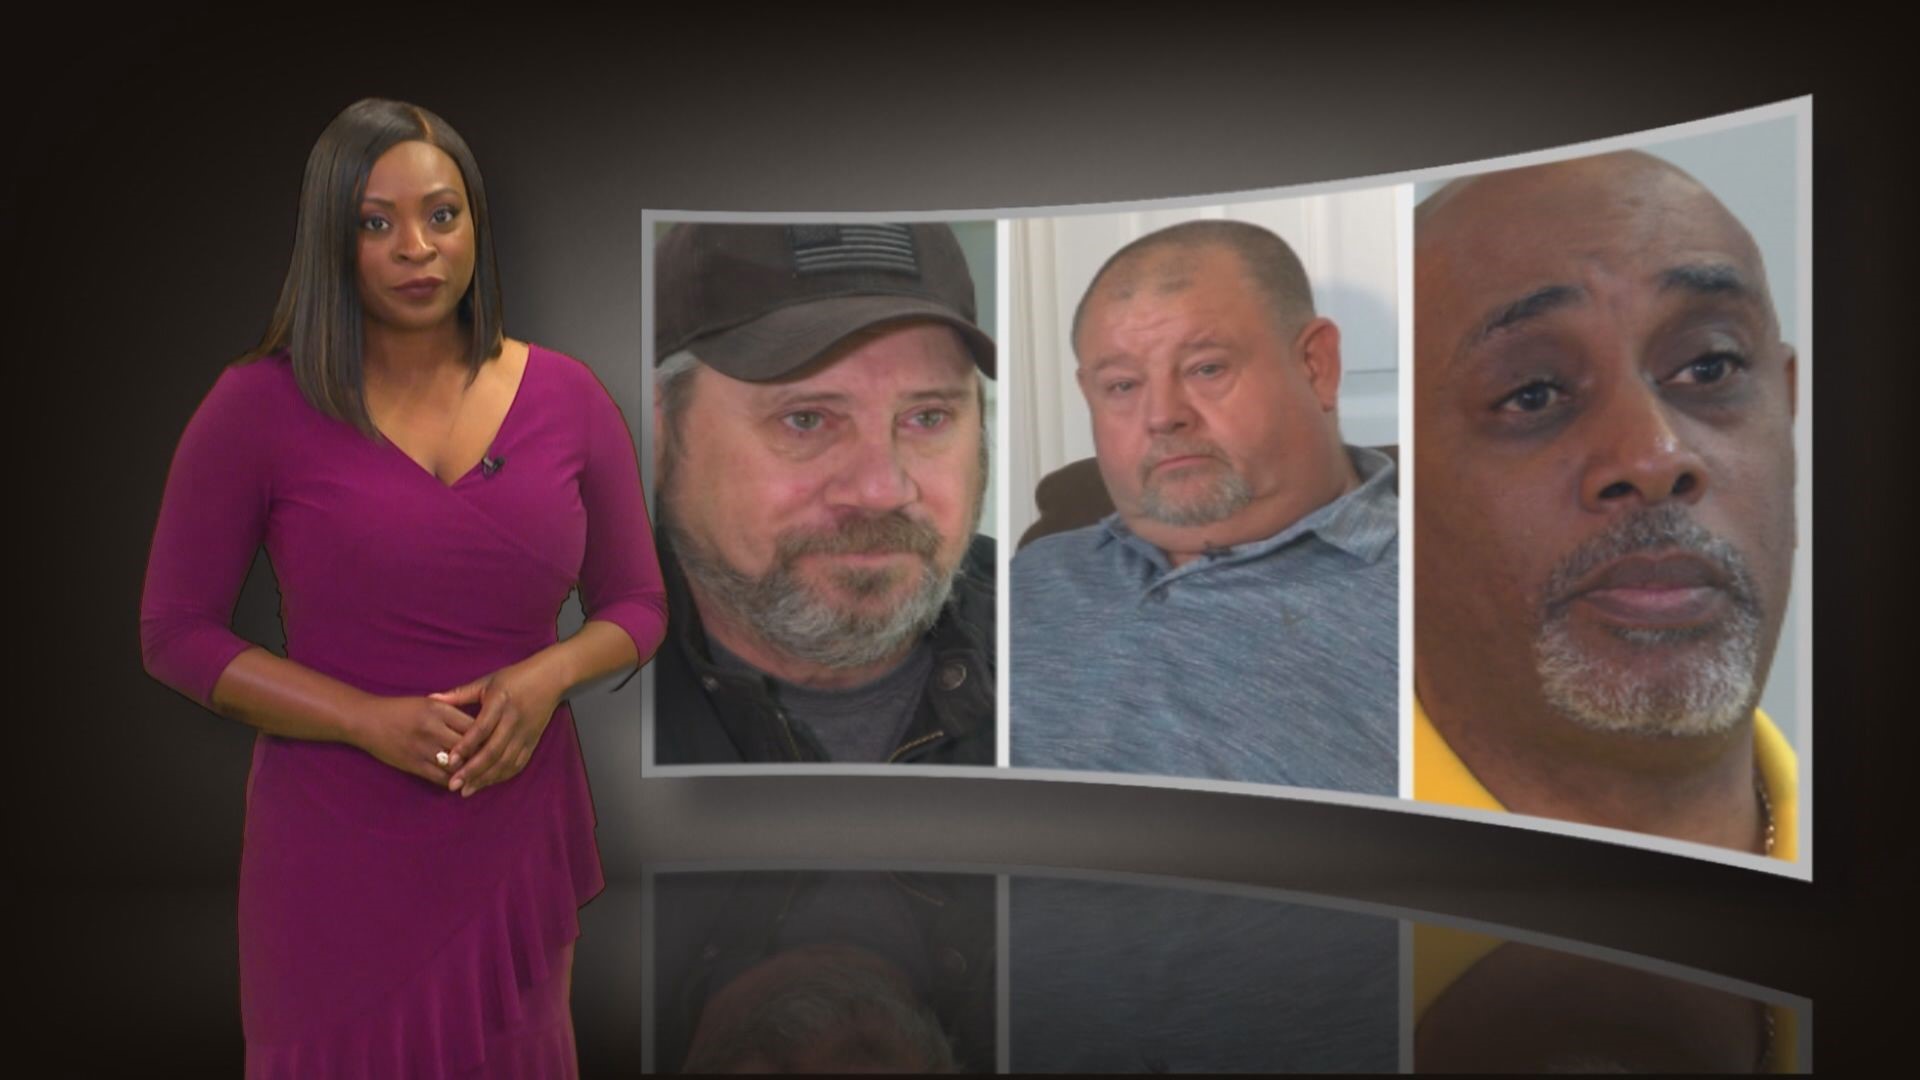 WFMY News 2's Lauren Coleman sat down with three Triad COVID long haulers who are slowly getting better but still feel the effects of the virus today.